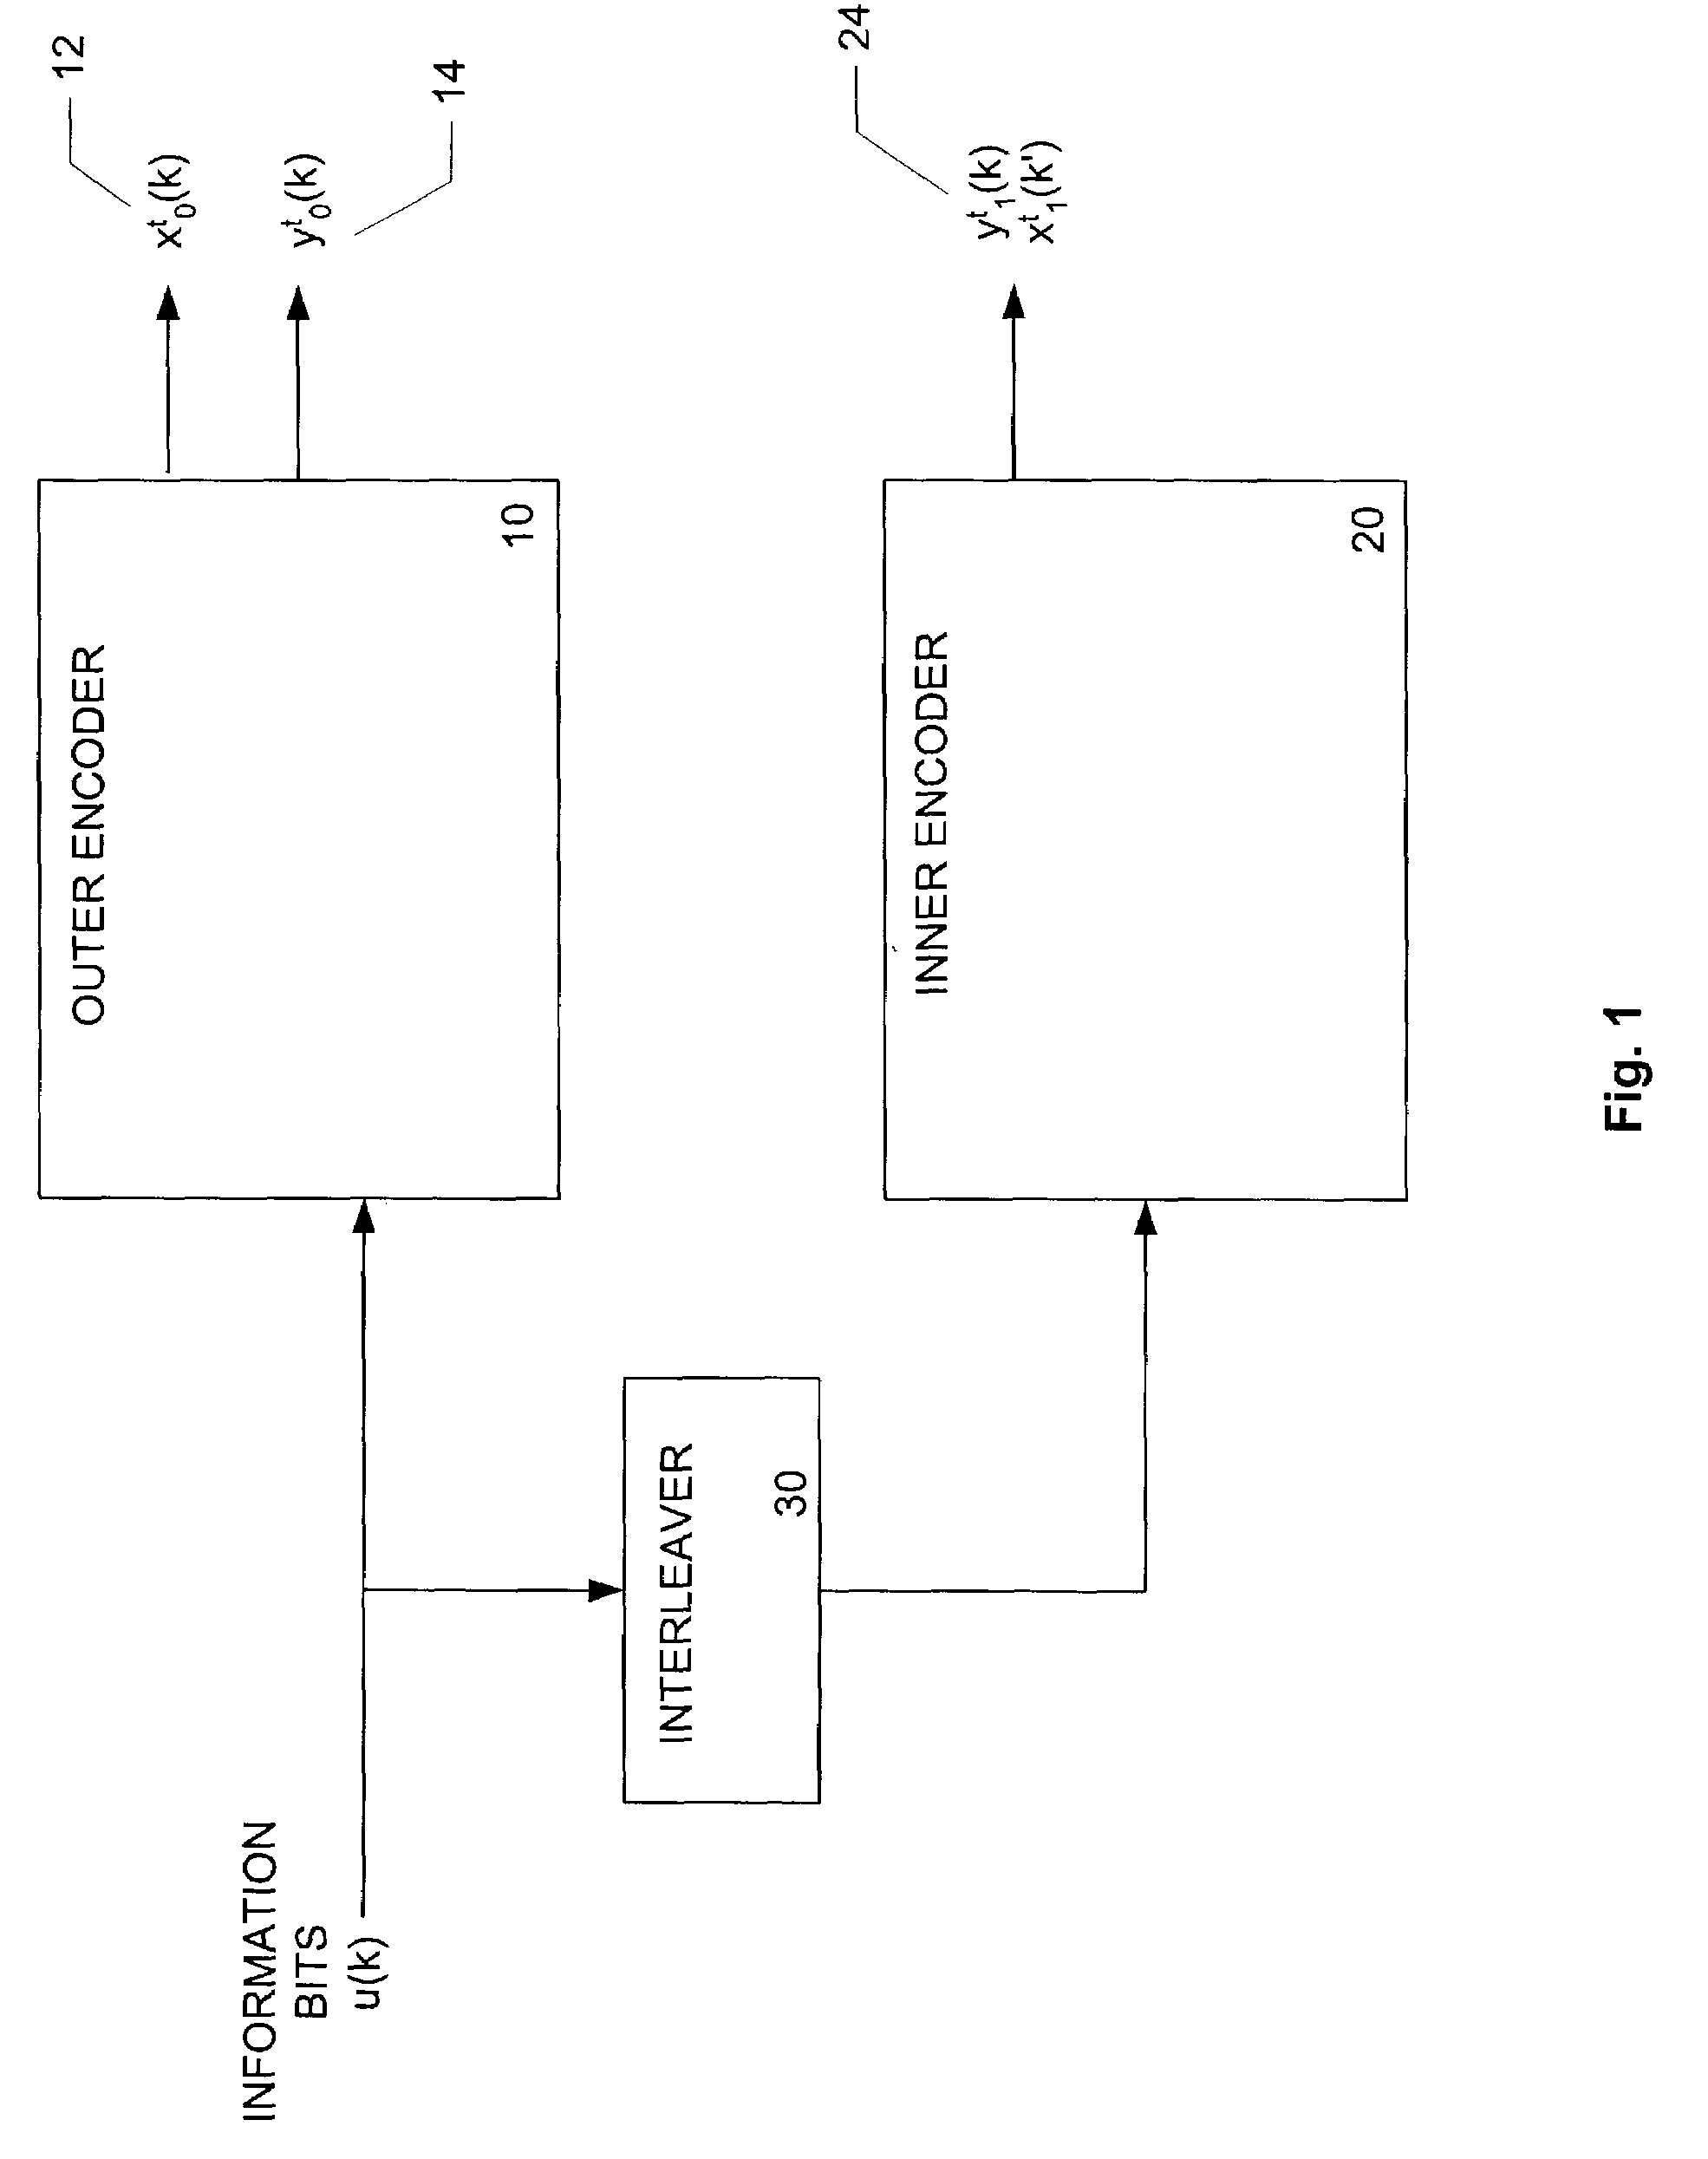 Memory configuration scheme enabling parallel decoding of turbo codes